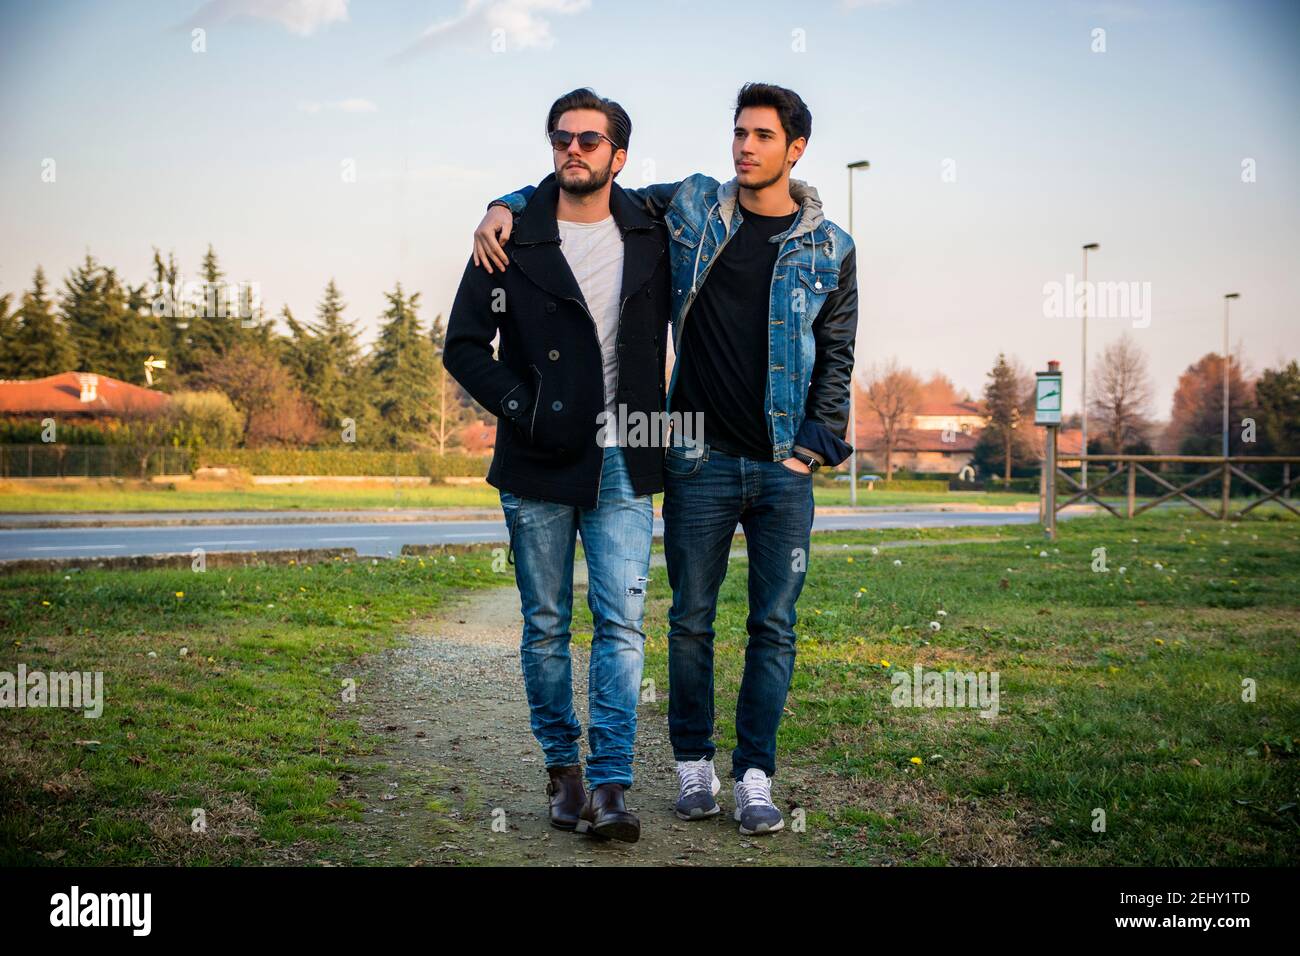 Two handsome young men, friends, in a park Stock Photo